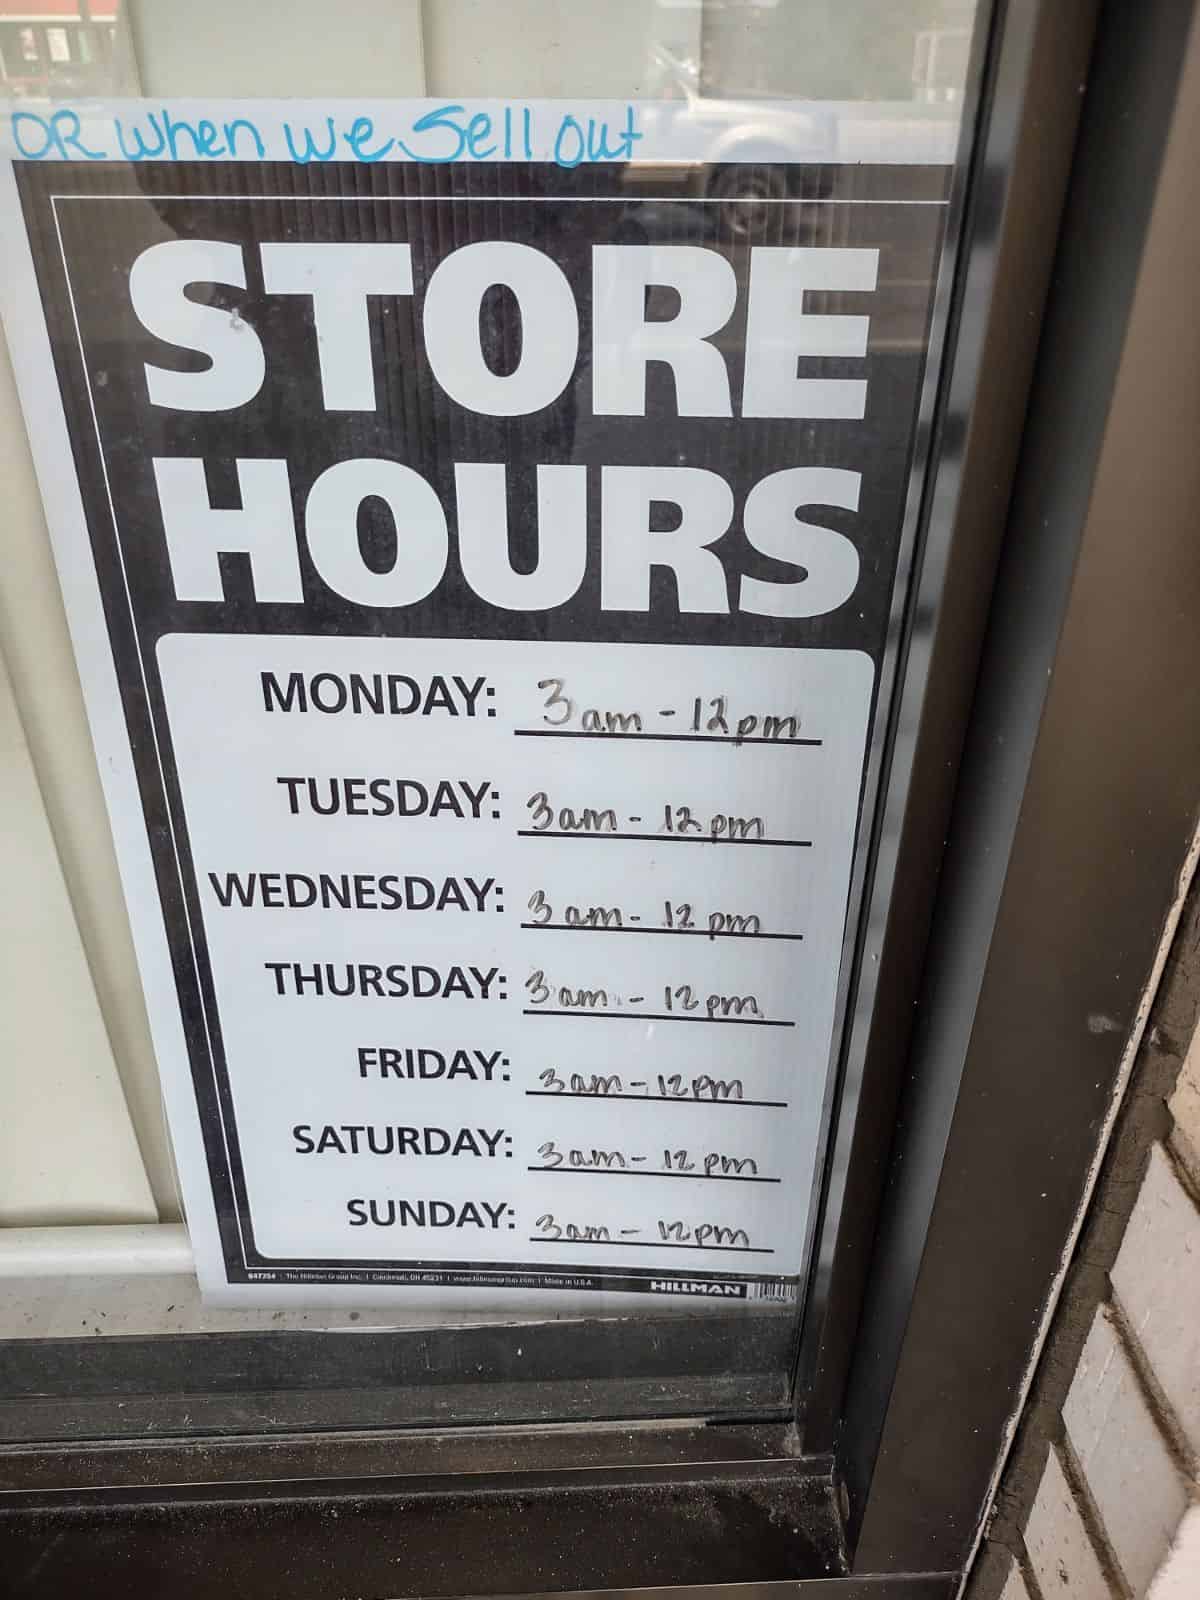 Store hour sign at a donut shop saying they are open from 3am-12pm or until they sell out.